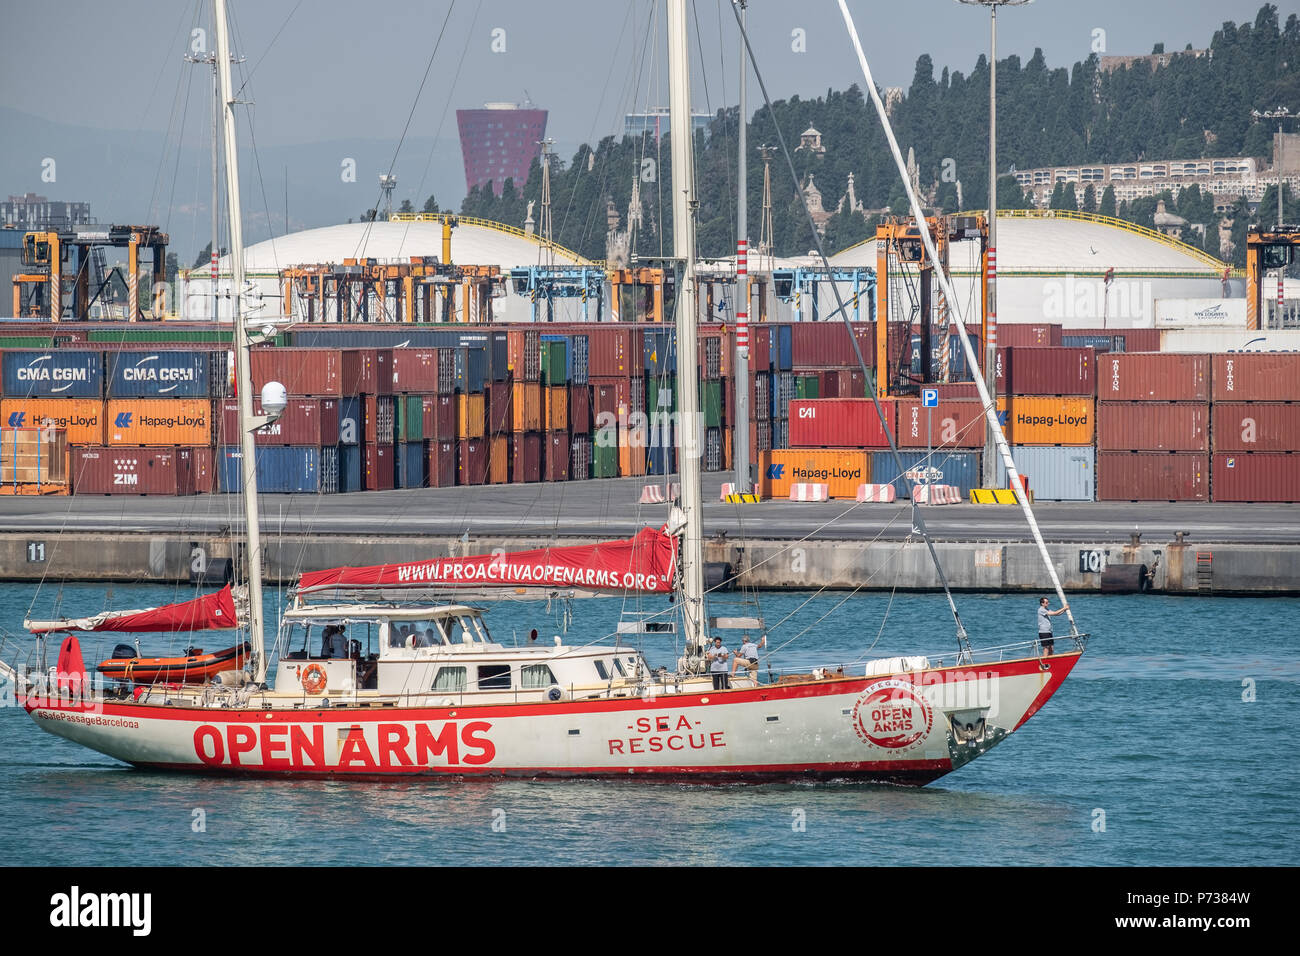 The rescue sailing boat Proactiva Open Arms has docked in Barcelona with 60 people rescued in the Mediterranean off the coast of Libya. Barcelona has offered itself as a refuge city after Italy's refusal to continue hosting more rescues carried out by NGOs. Stock Photo